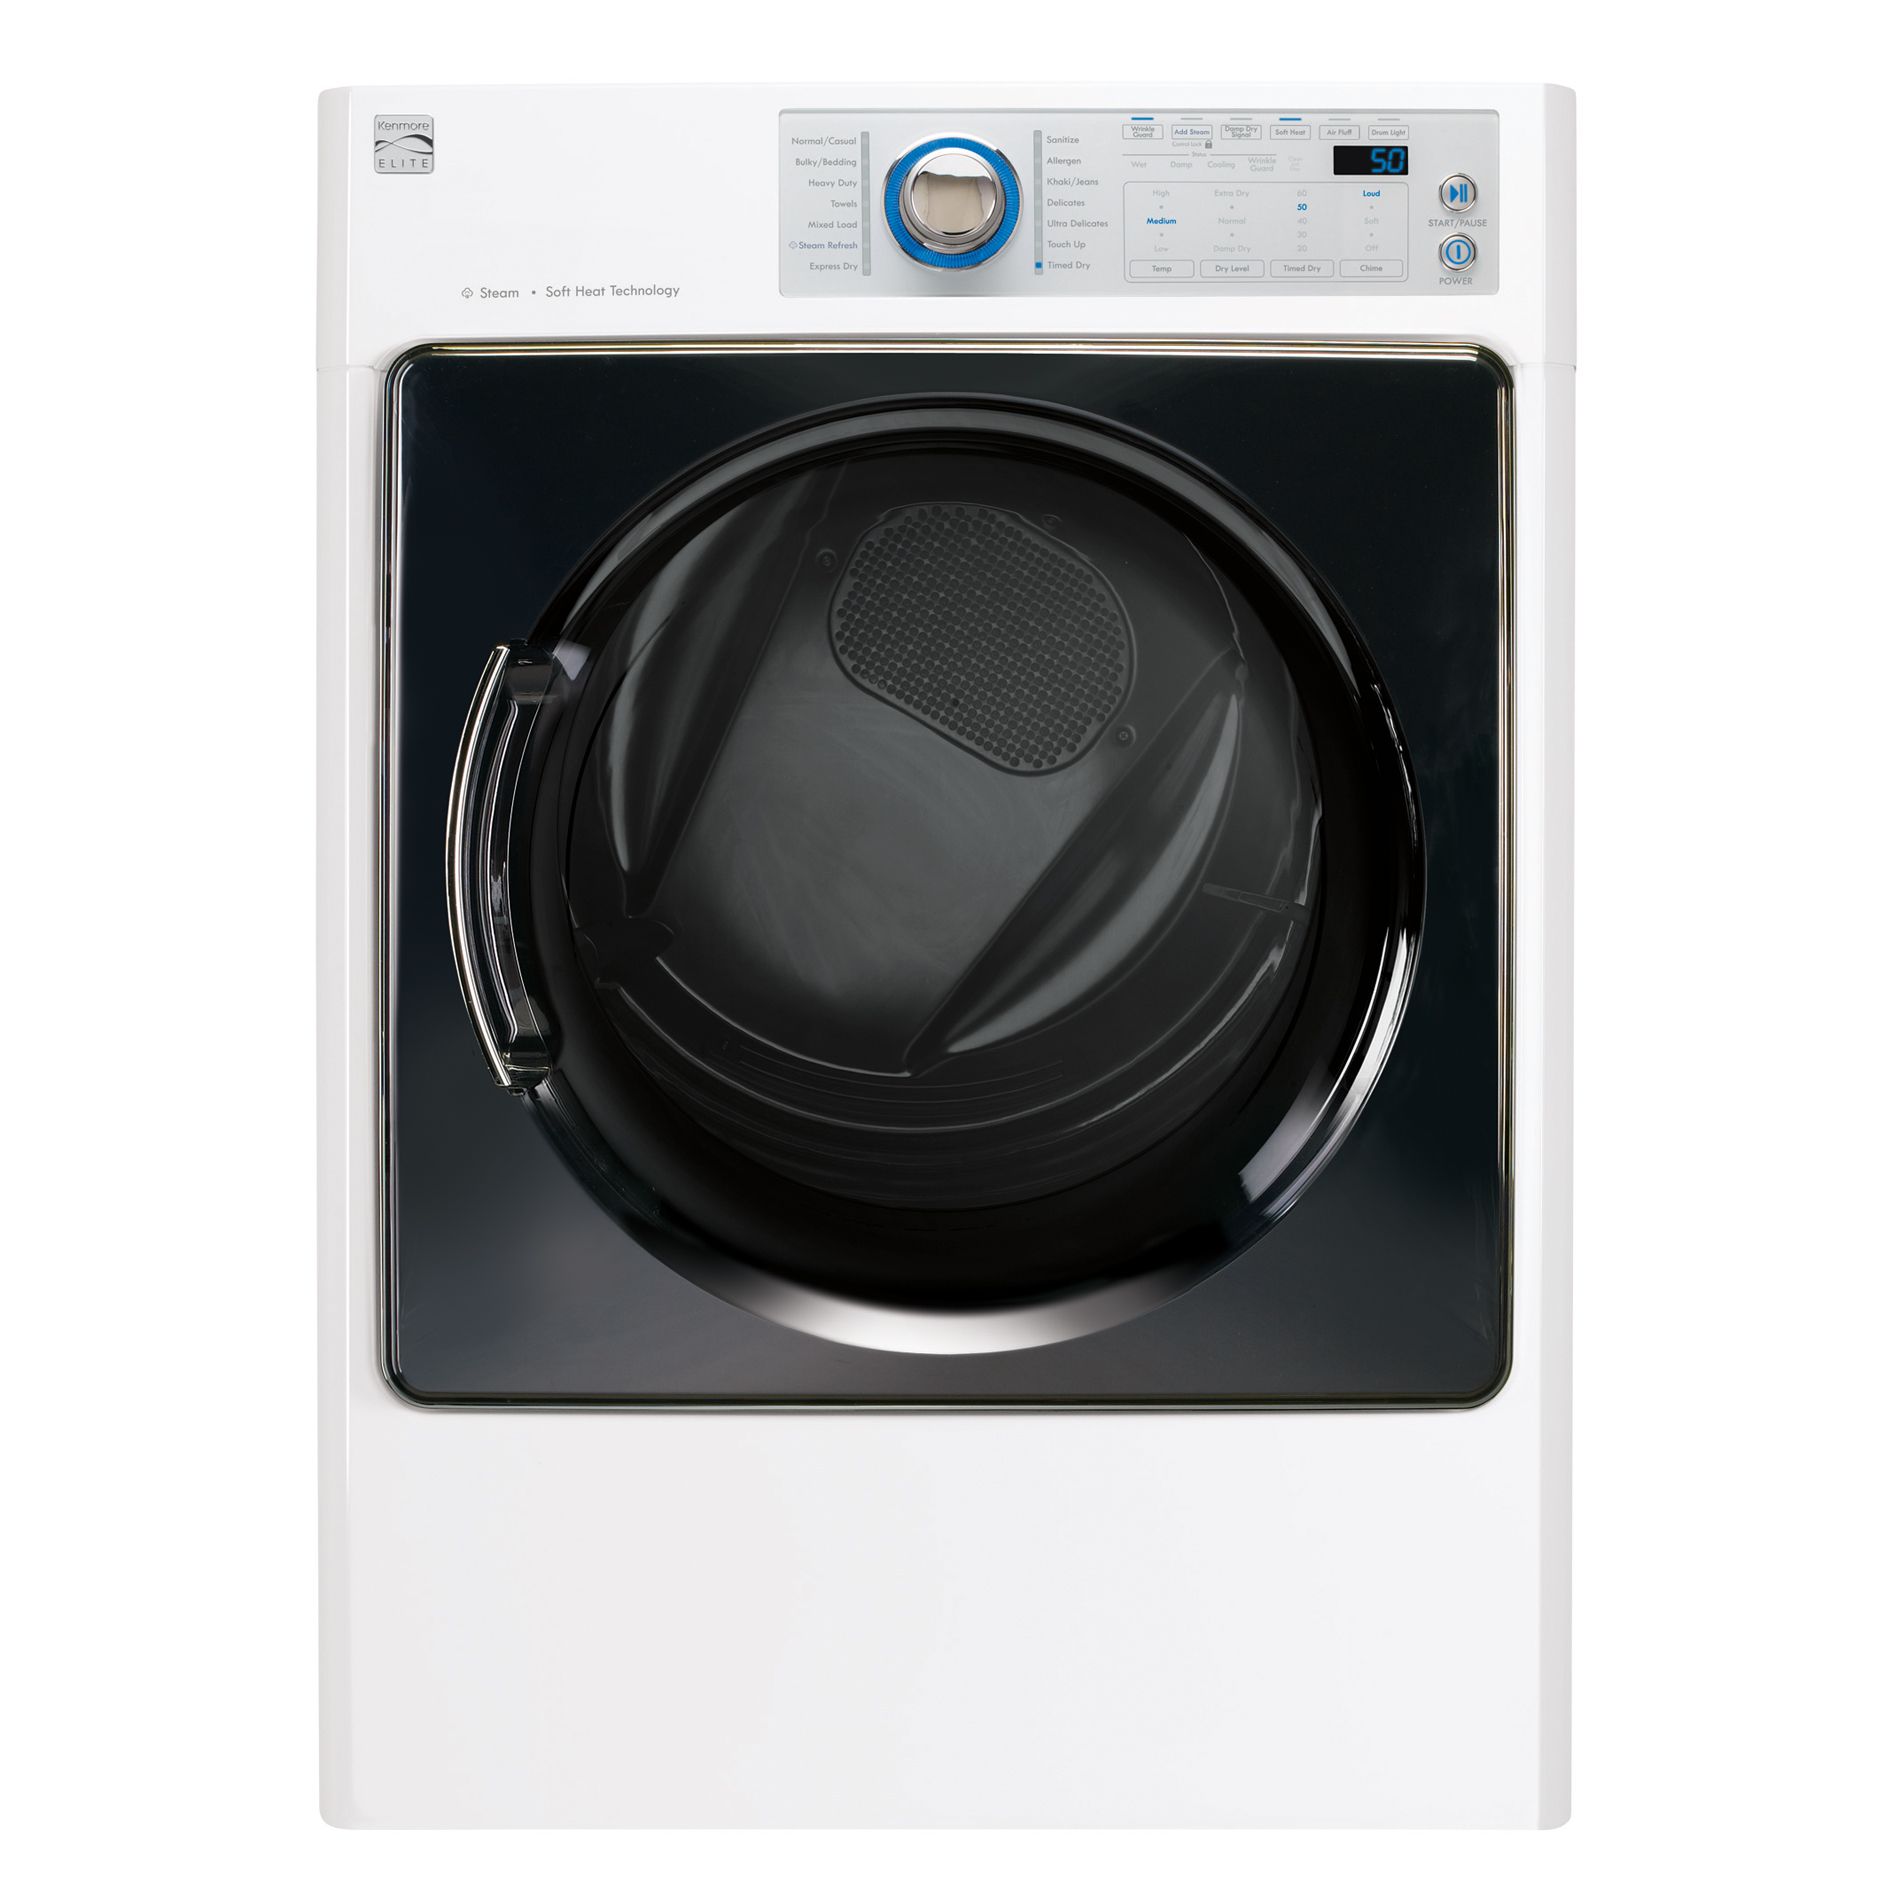 Kenmore Elite 8.0 cu. ft. Electric Dryer: Efficient Drying at Sears